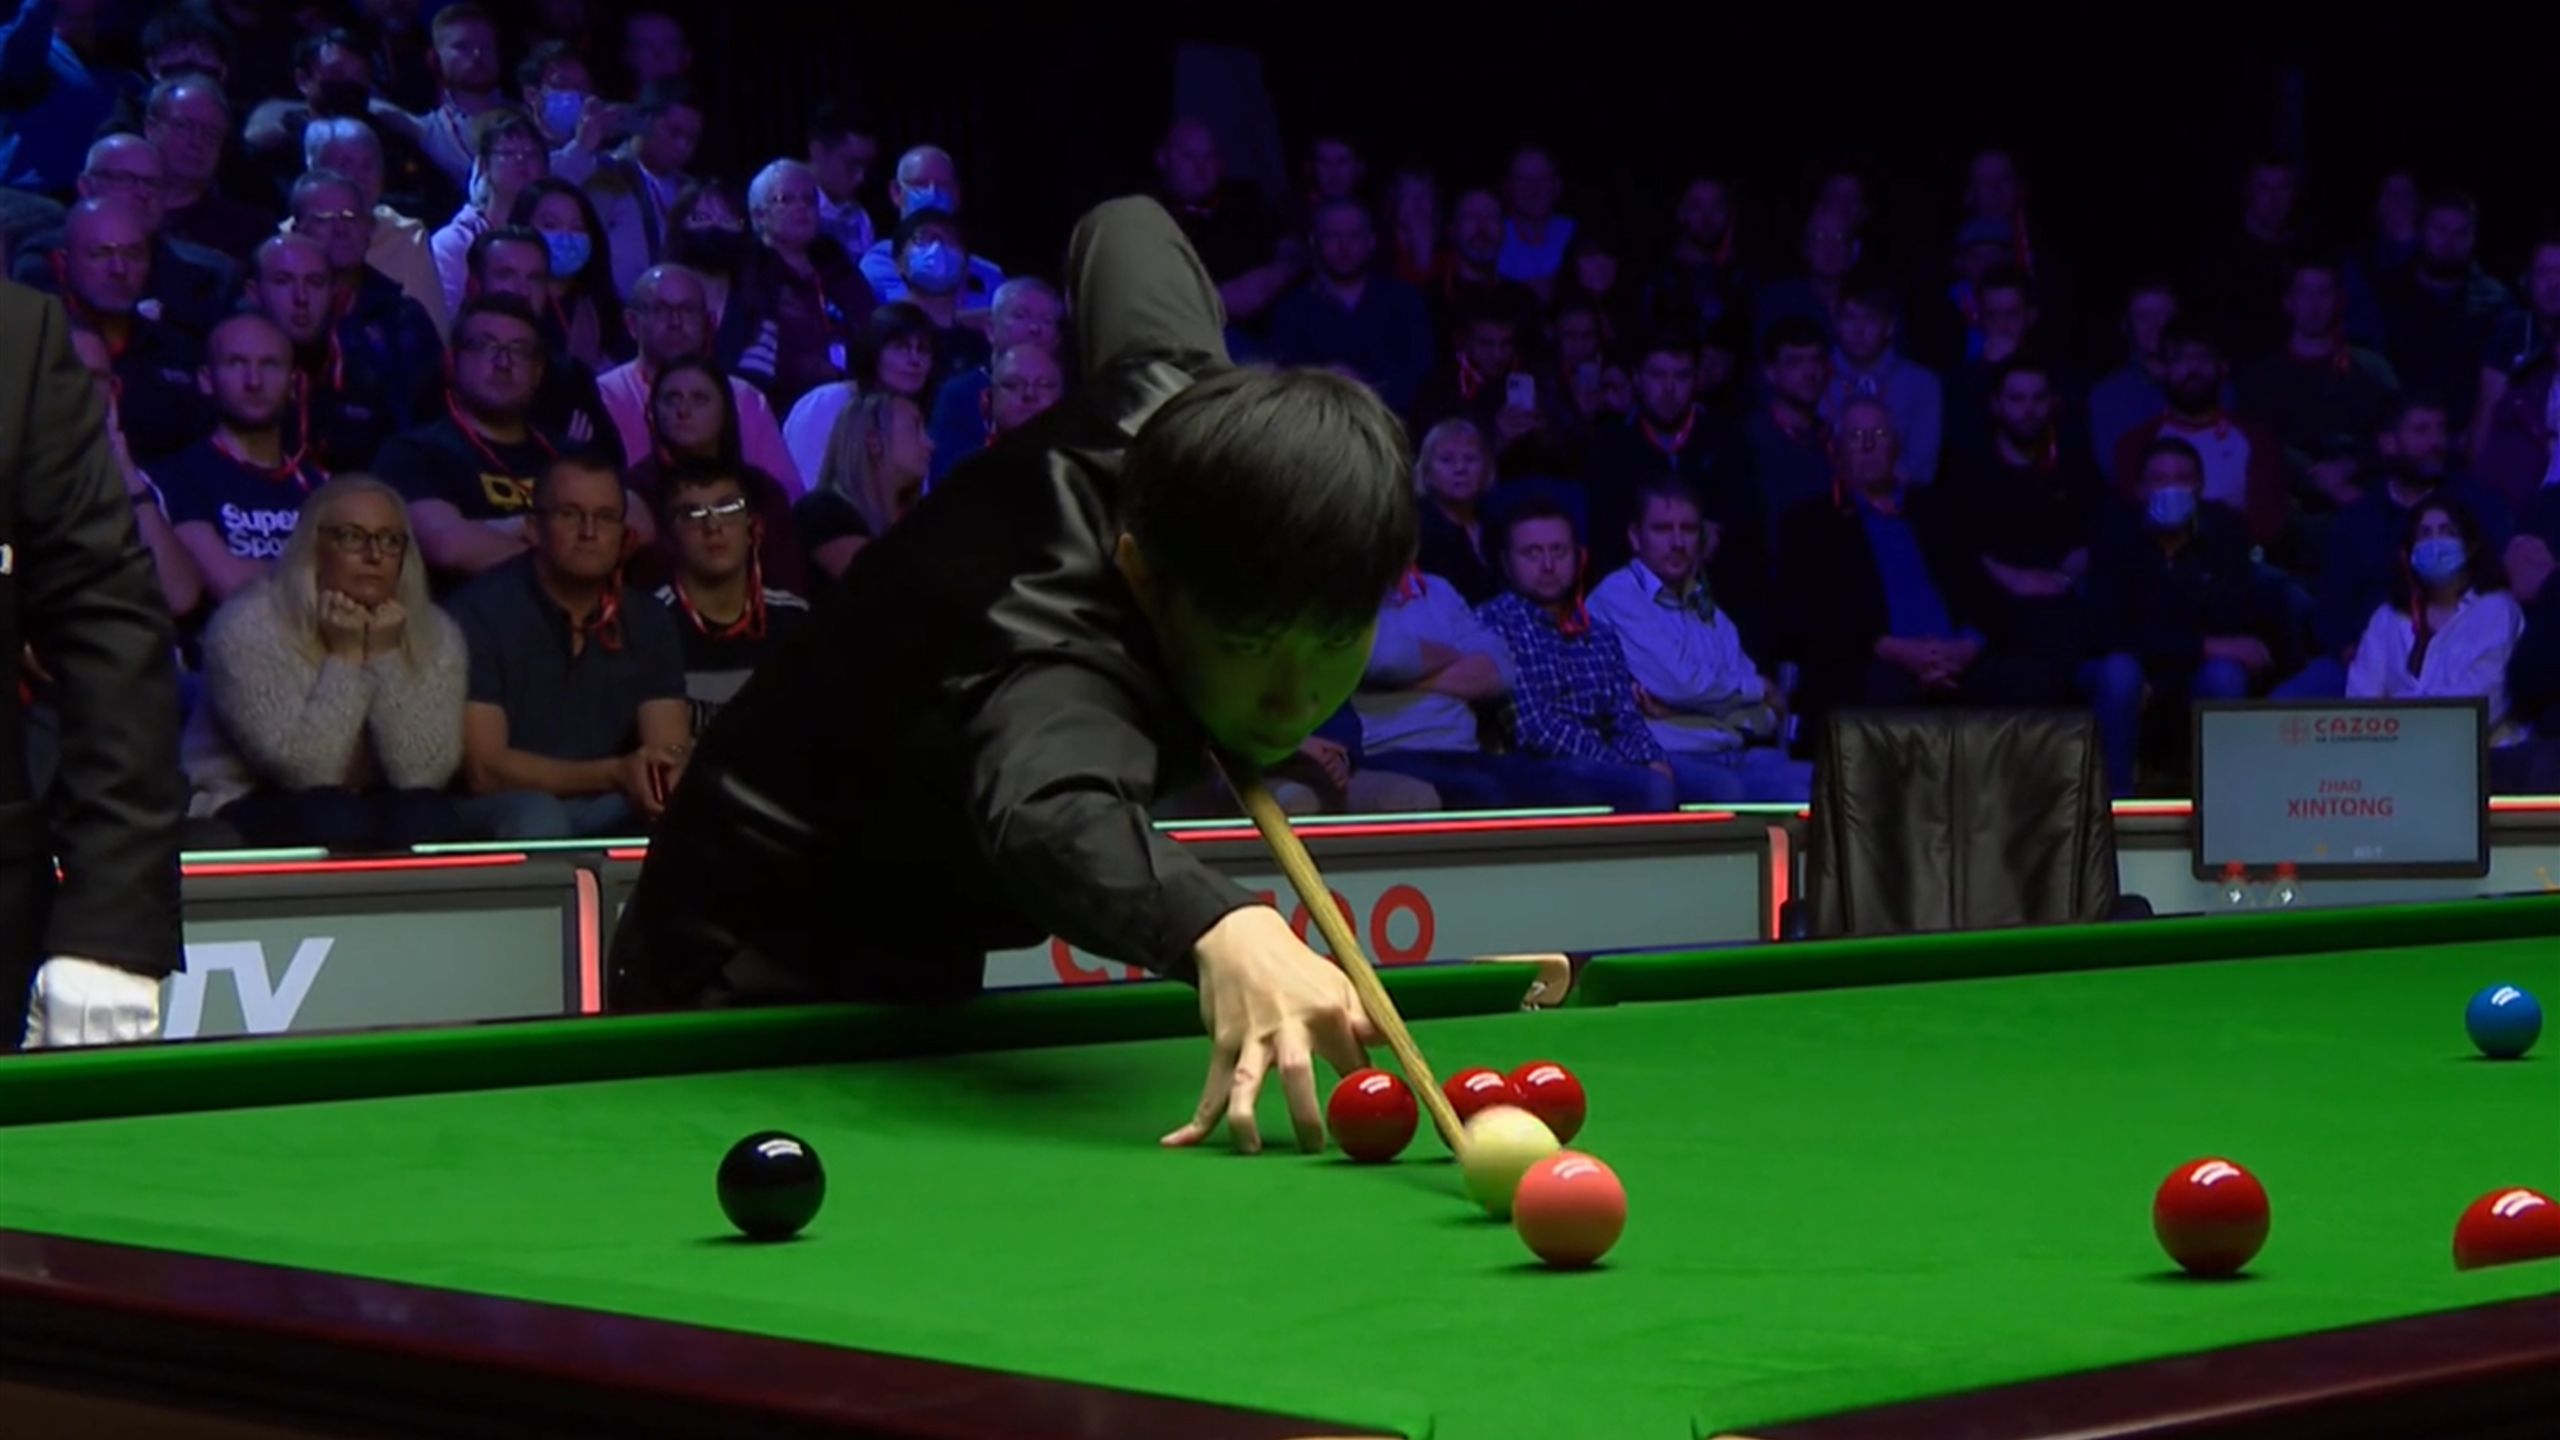 World Grand Prix LIVE - Zhao Xintong, Mark Williams and Kyren Wilson all in action on day 1